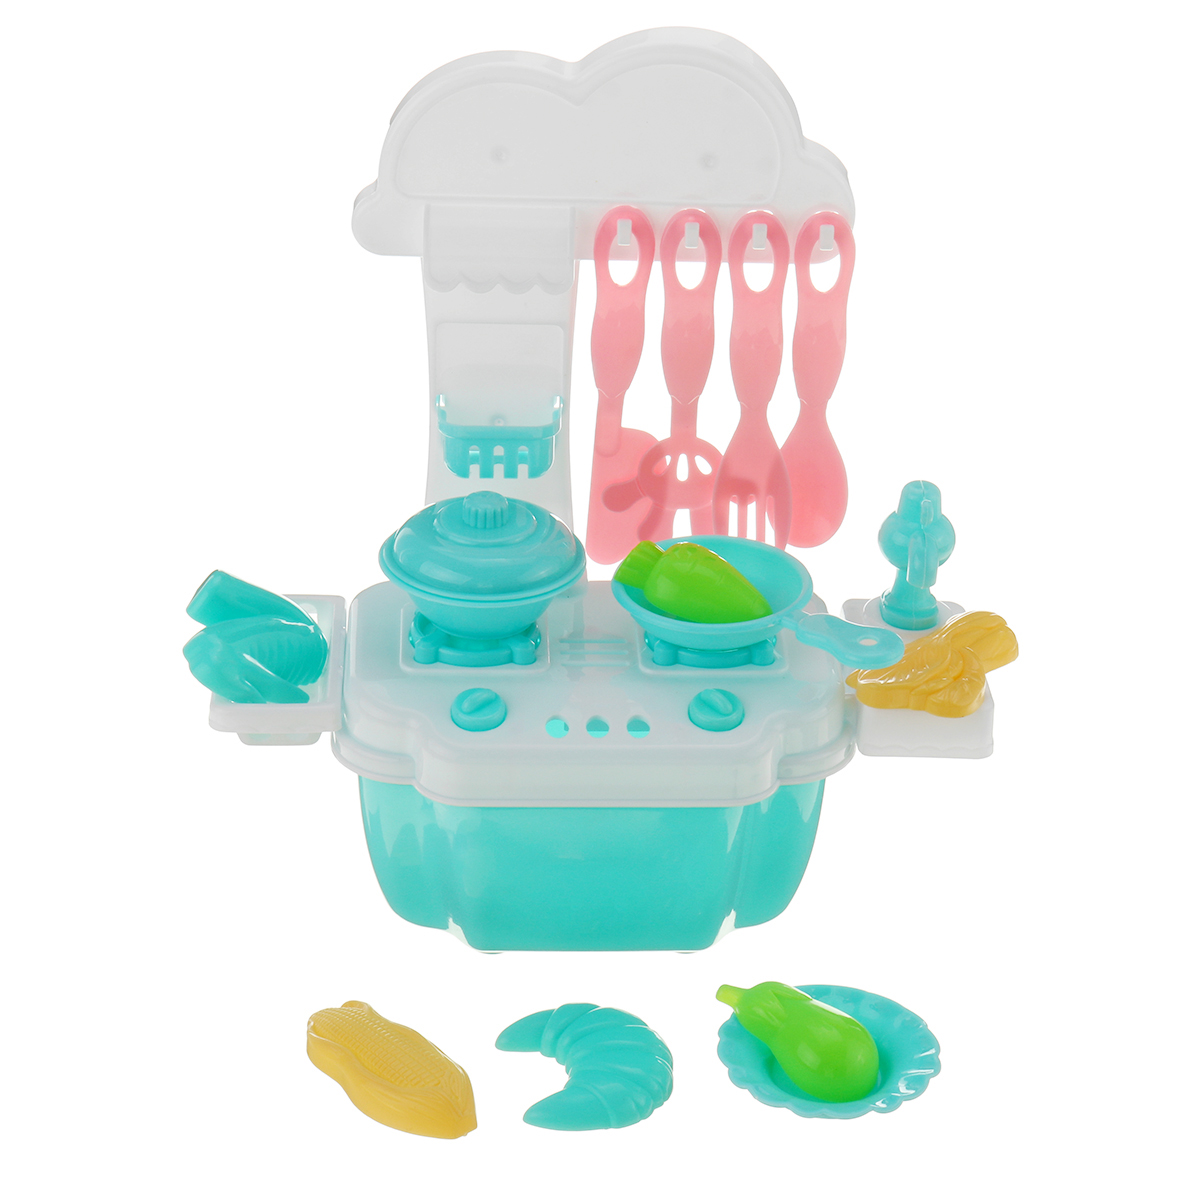 Kid-Play-House-Toy-Kitchen-Cooking-Pots-Pans-Food-Dishes-Cookware-Toys-1628195-8